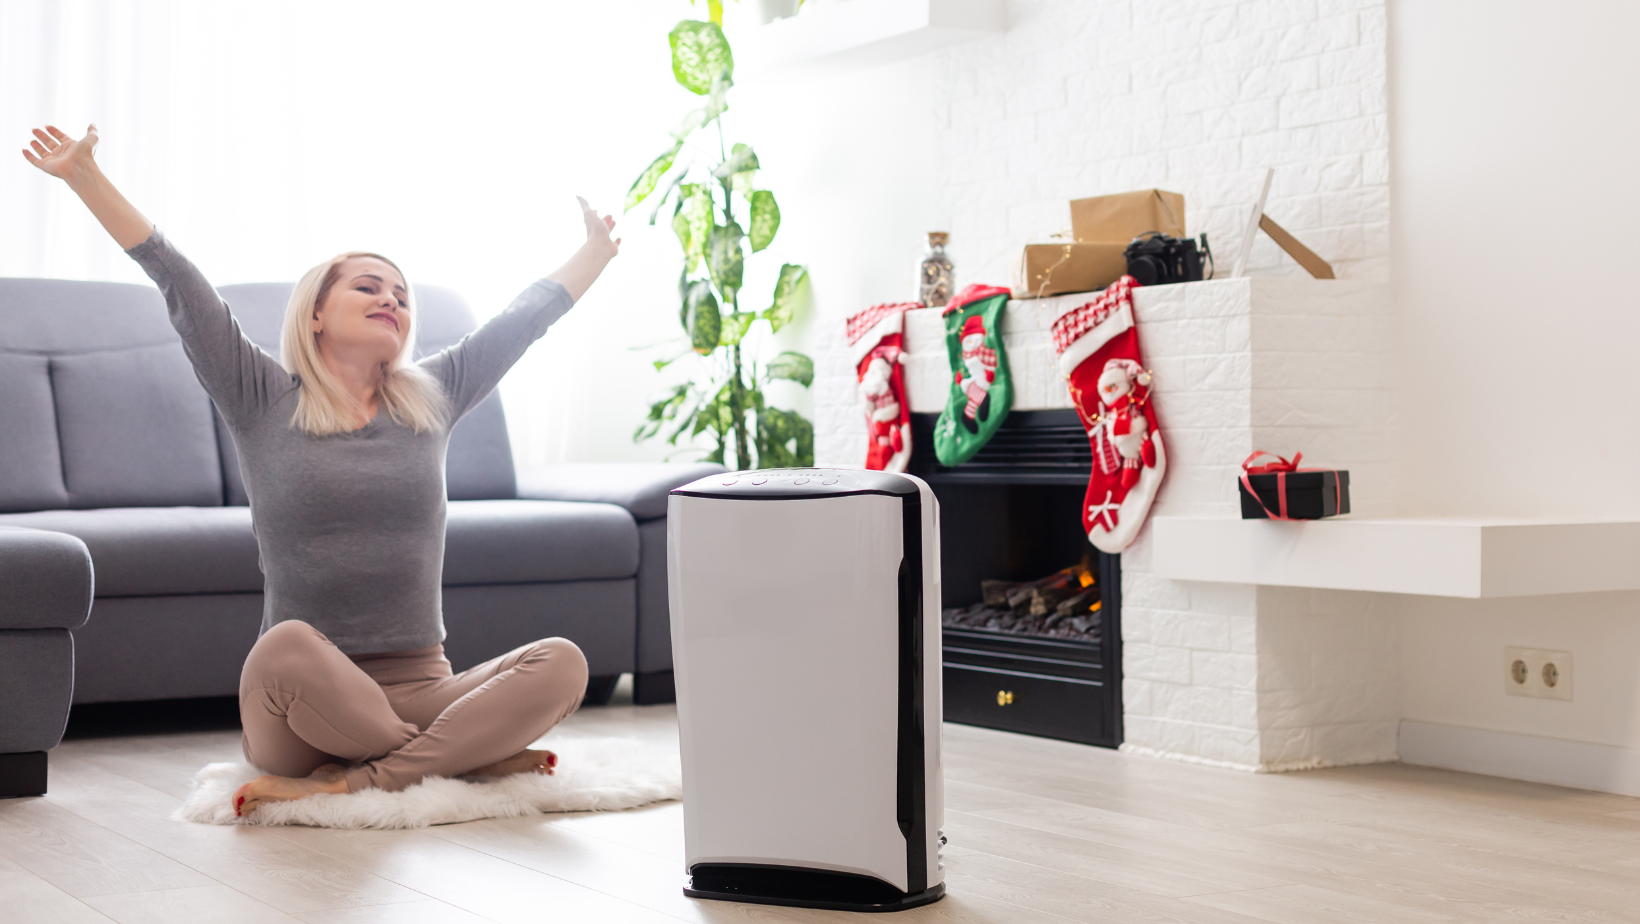 Air purifier in the living room with a woman, Christmas stockings, and a fireplace in the background